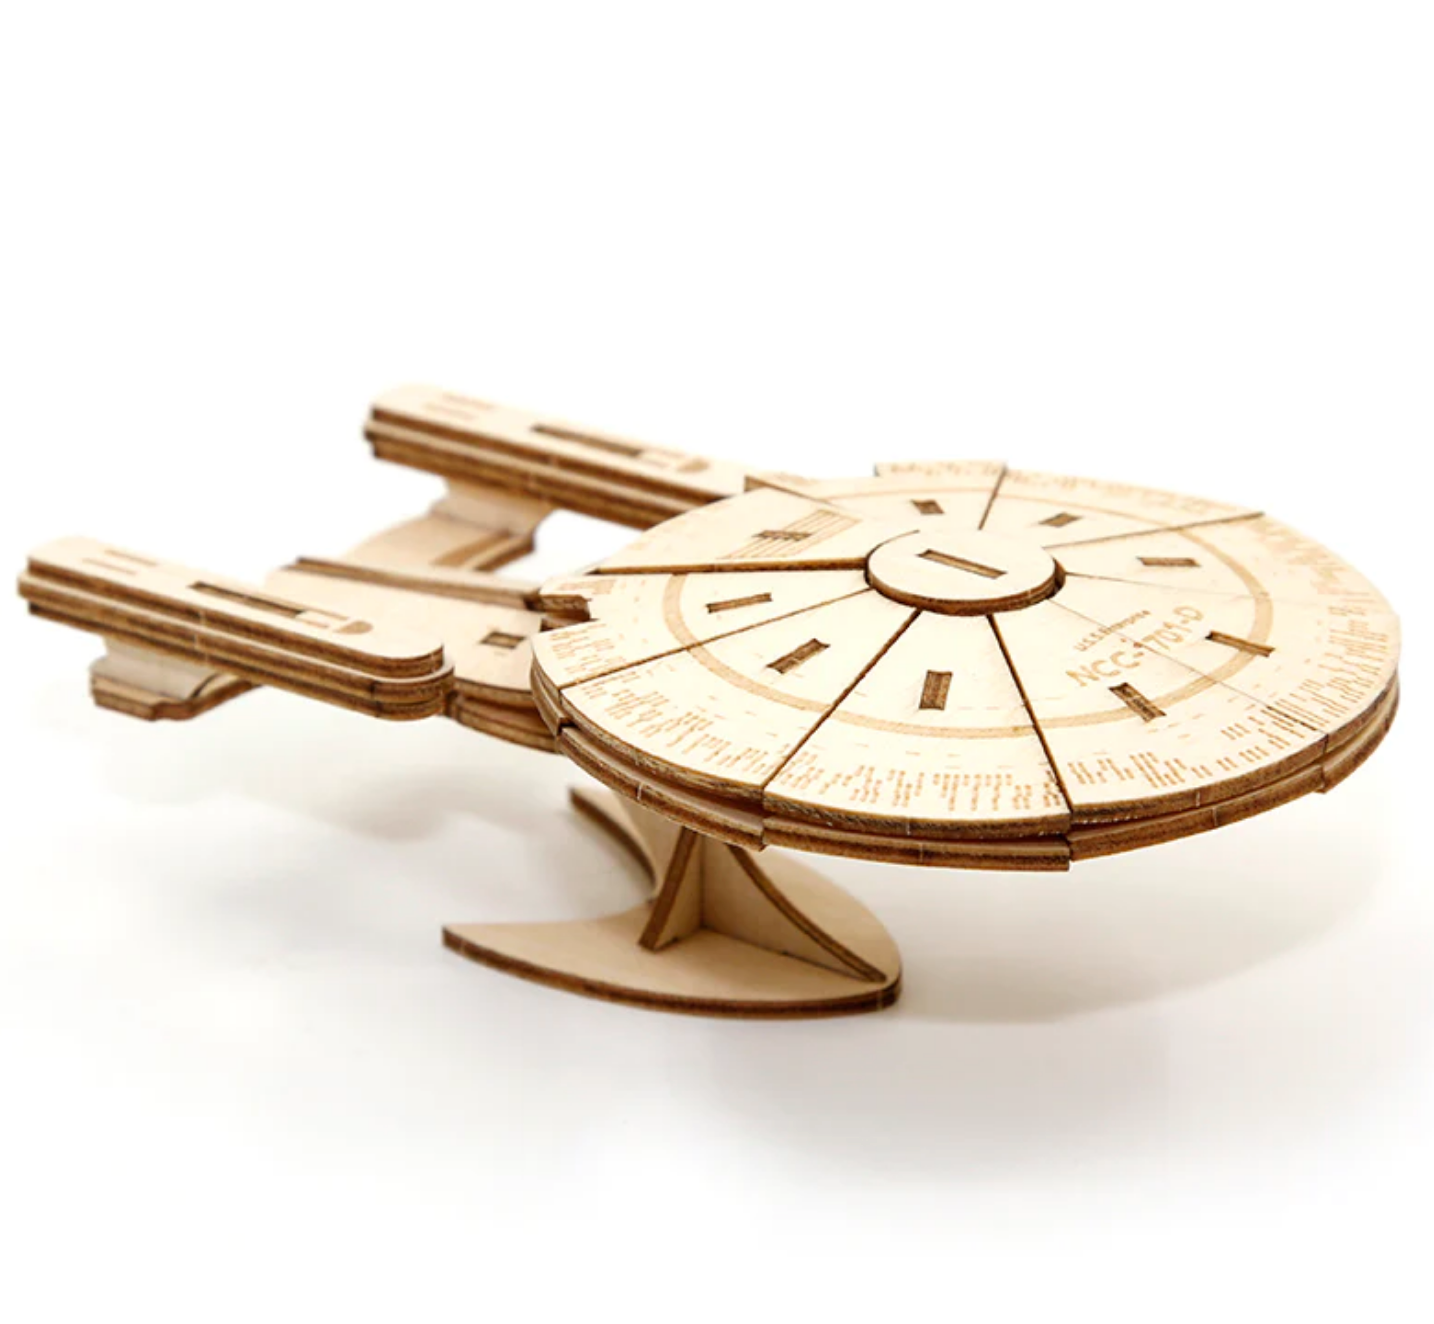 A wooden model of the USS Enterprise from Star Trek The Next Generation.